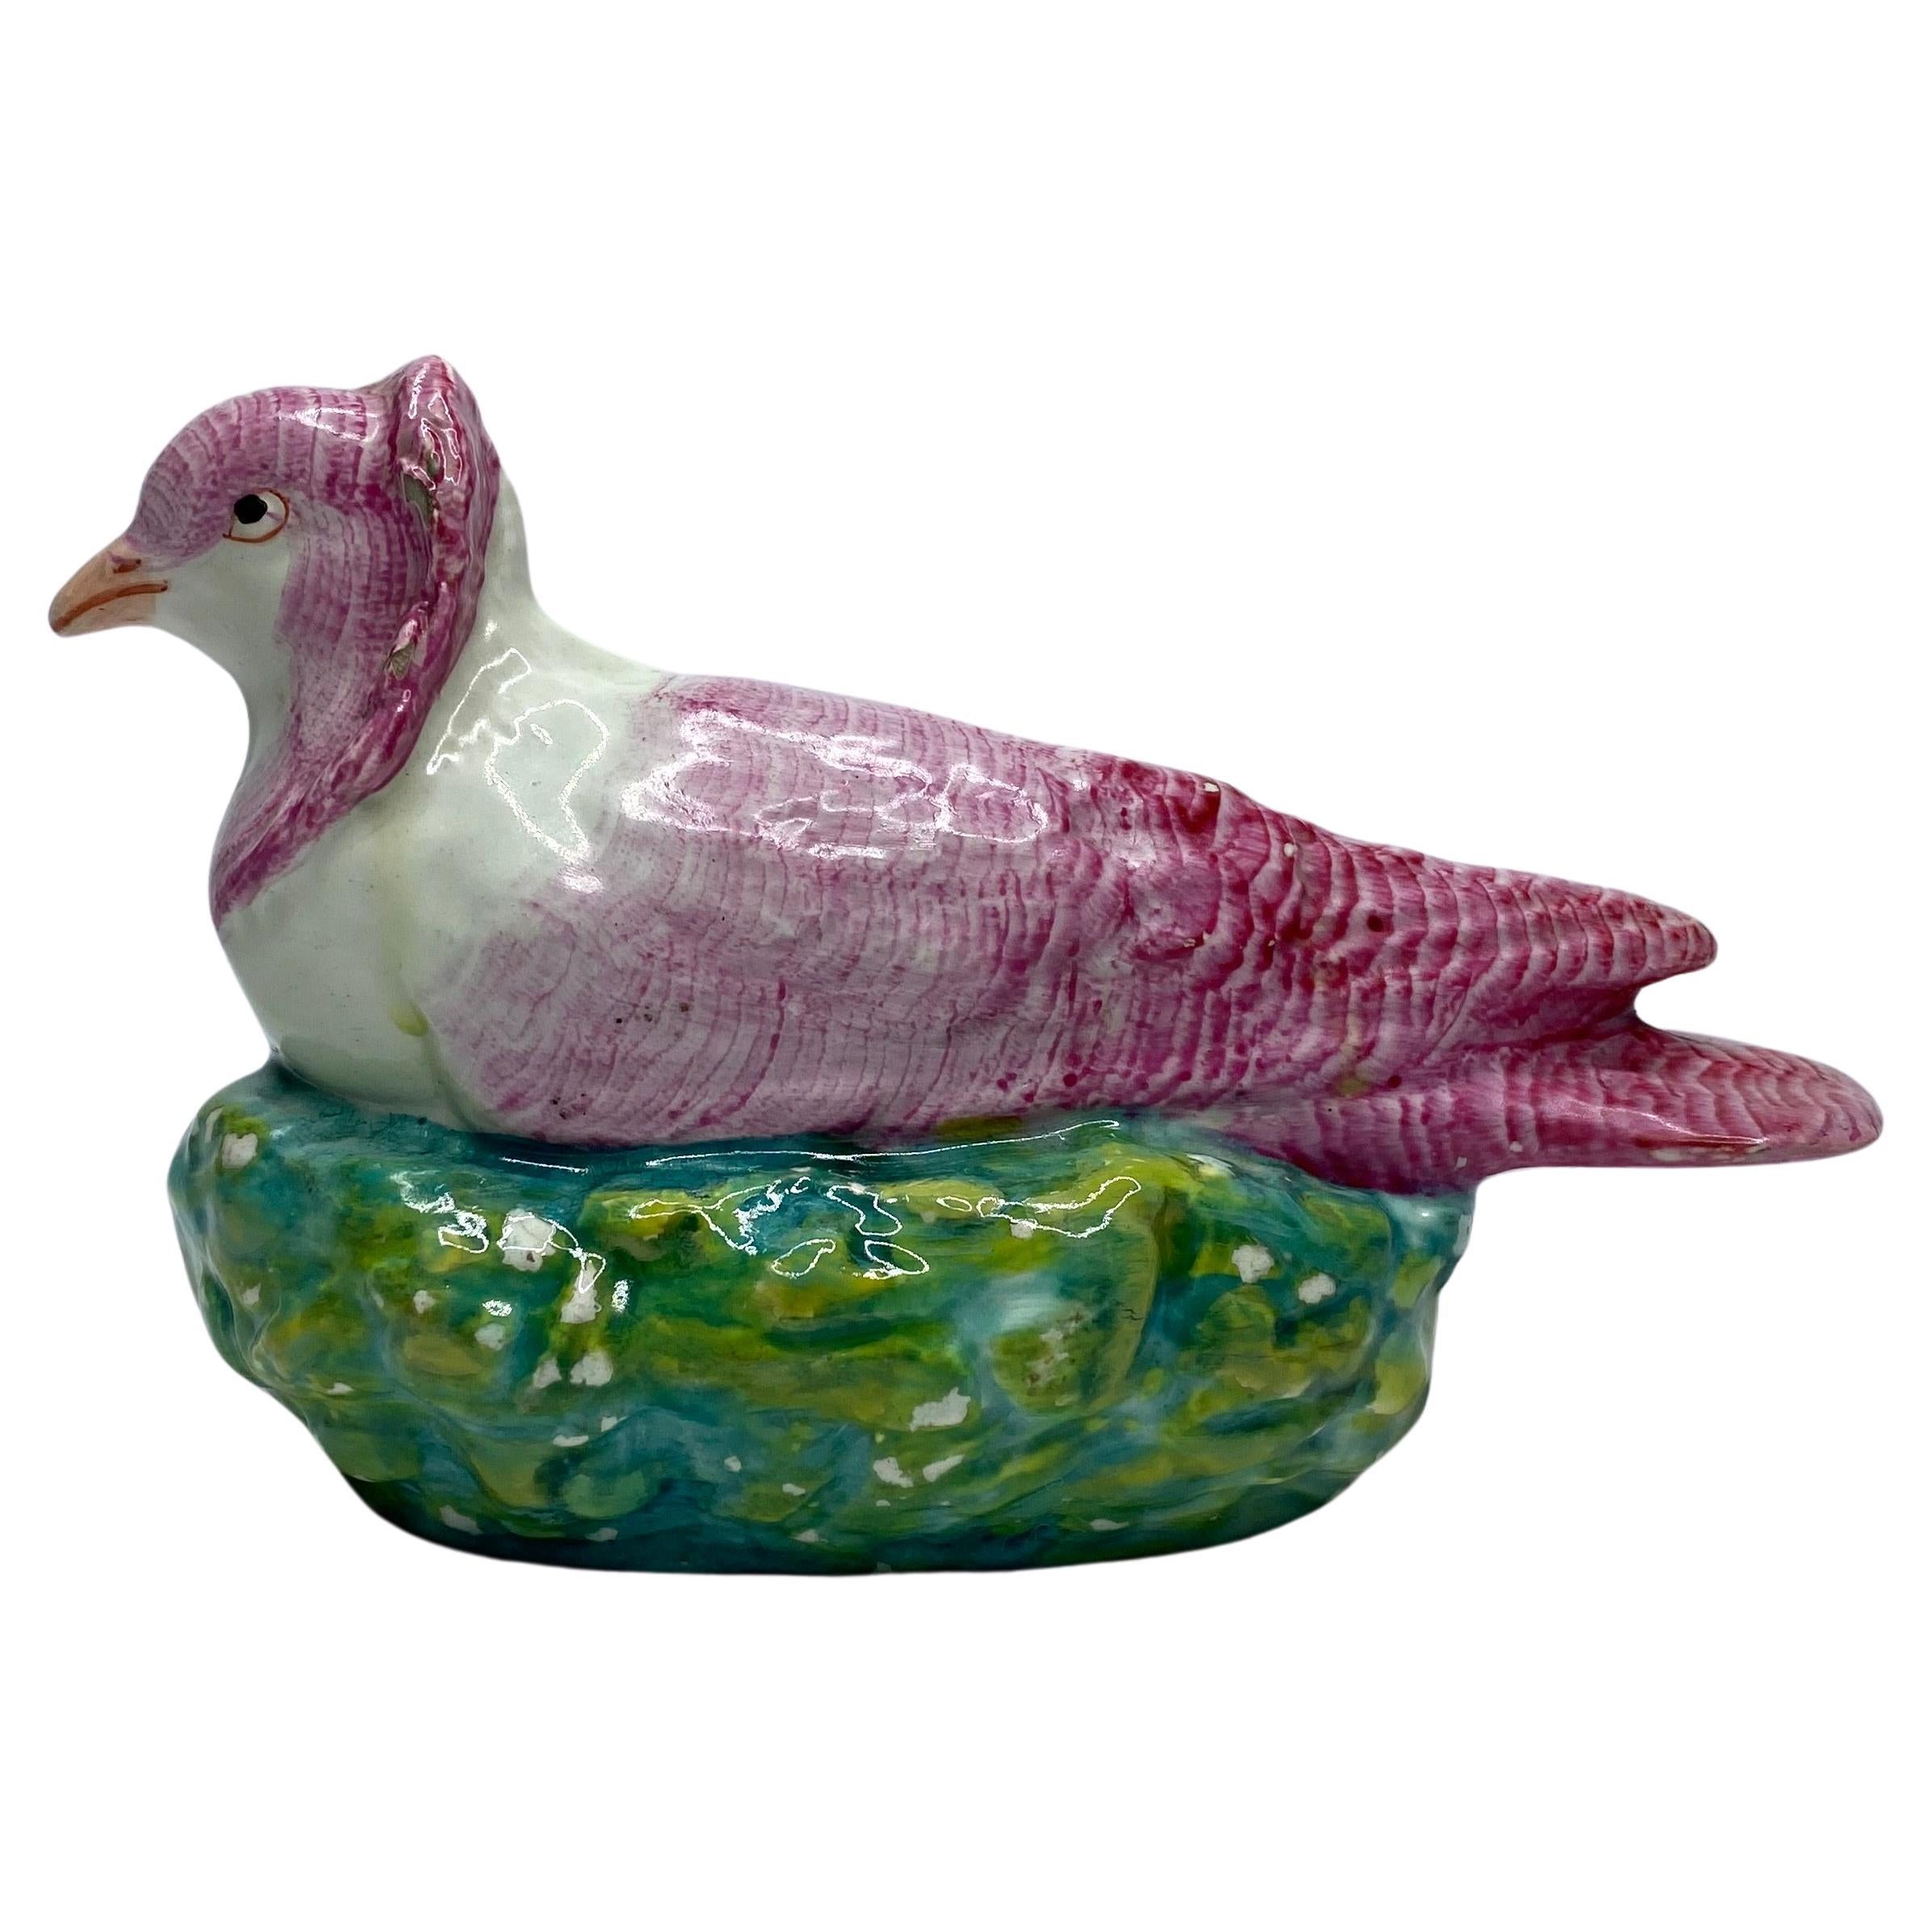 Enoch Wood pottery dove on nest, Staffordshire, c. 1820.